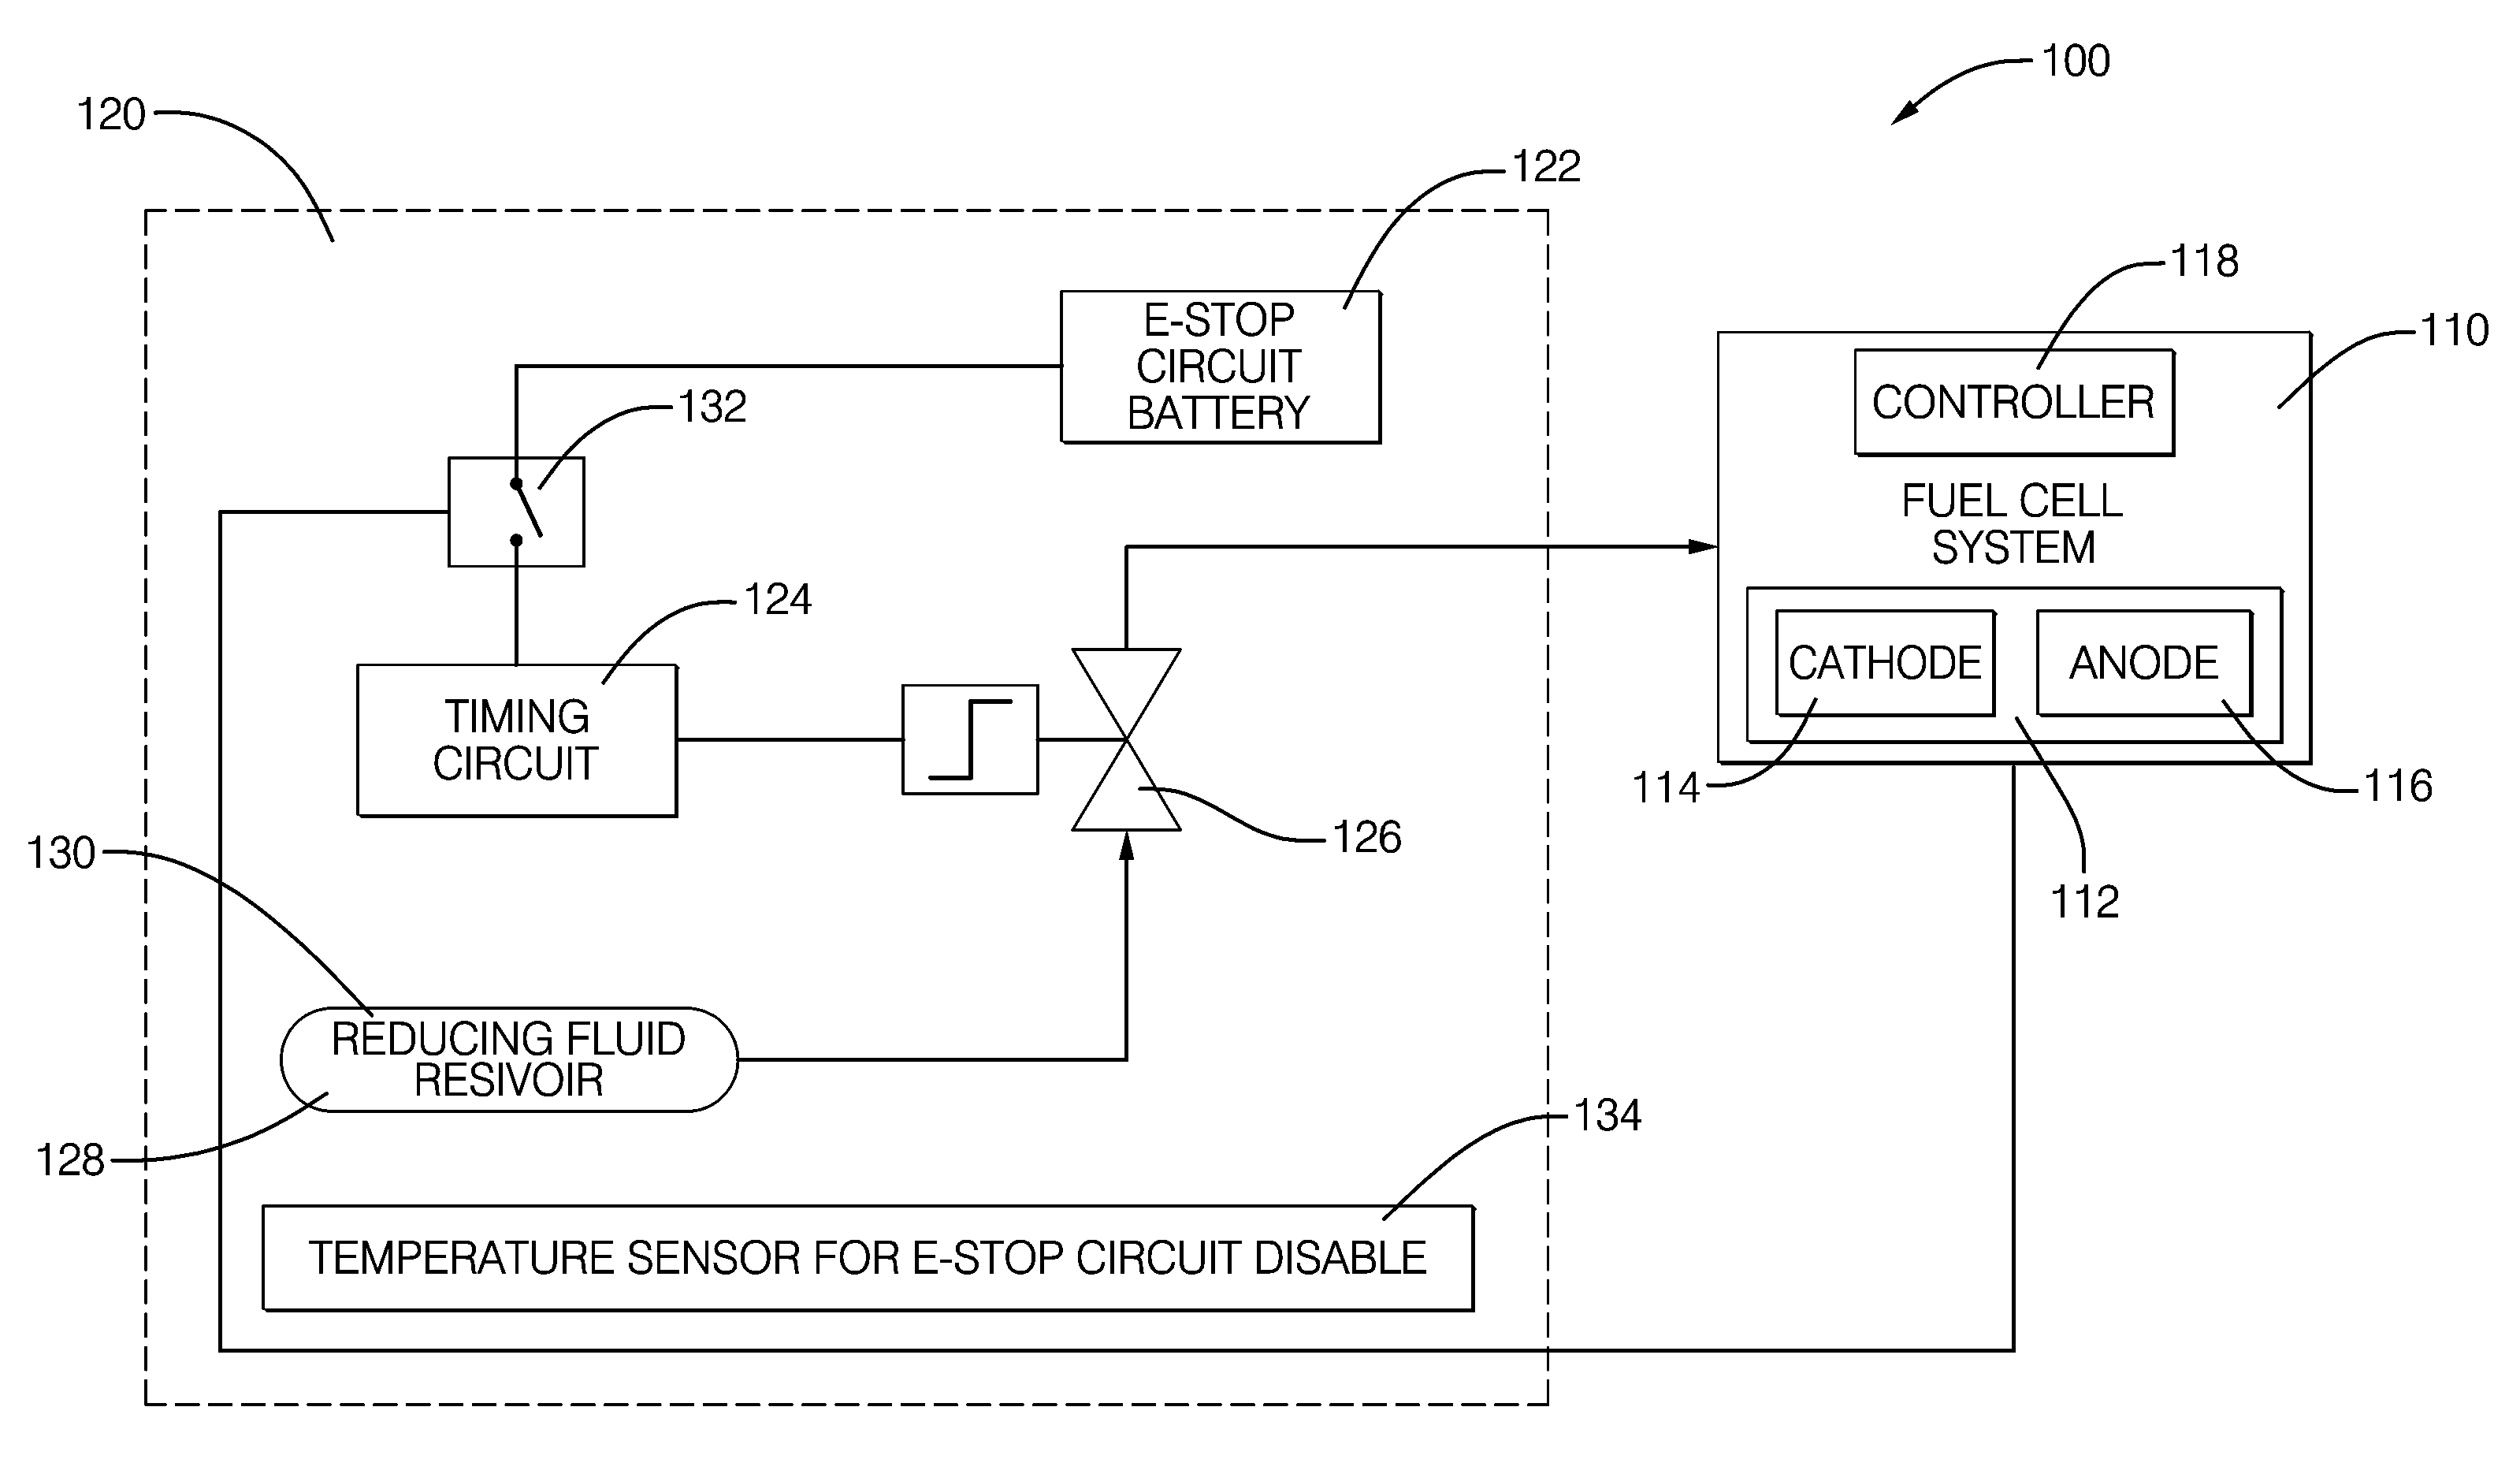 Apparatus for solid-oxide fuel cell shutdown having a timing circuit and a reservoir